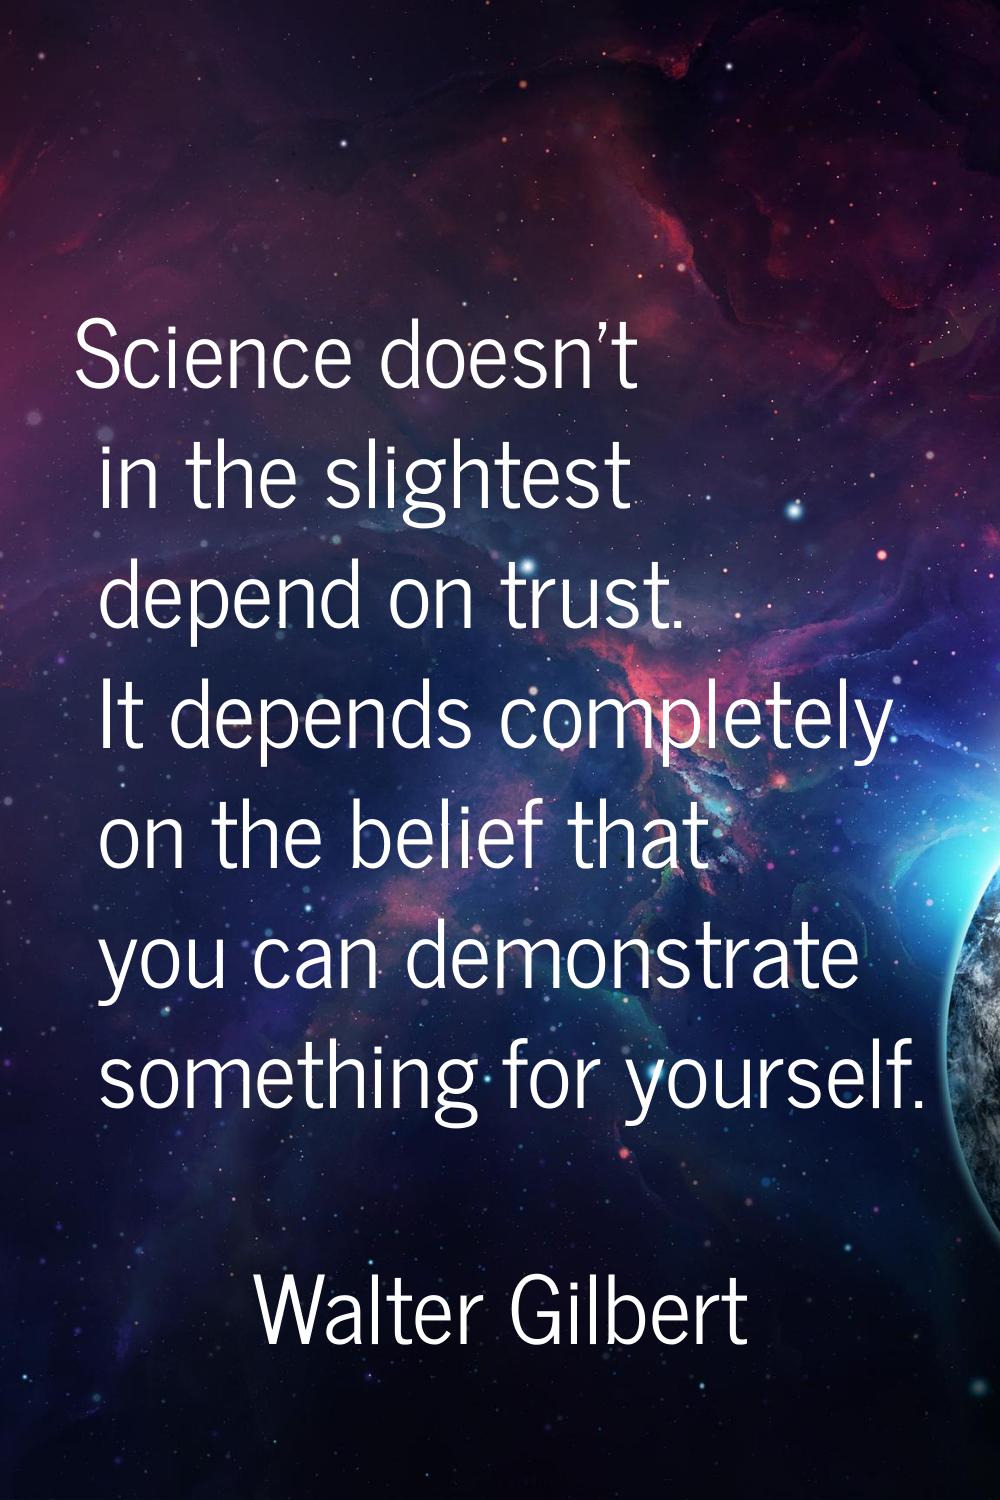 Science doesn't in the slightest depend on trust. It depends completely on the belief that you can 